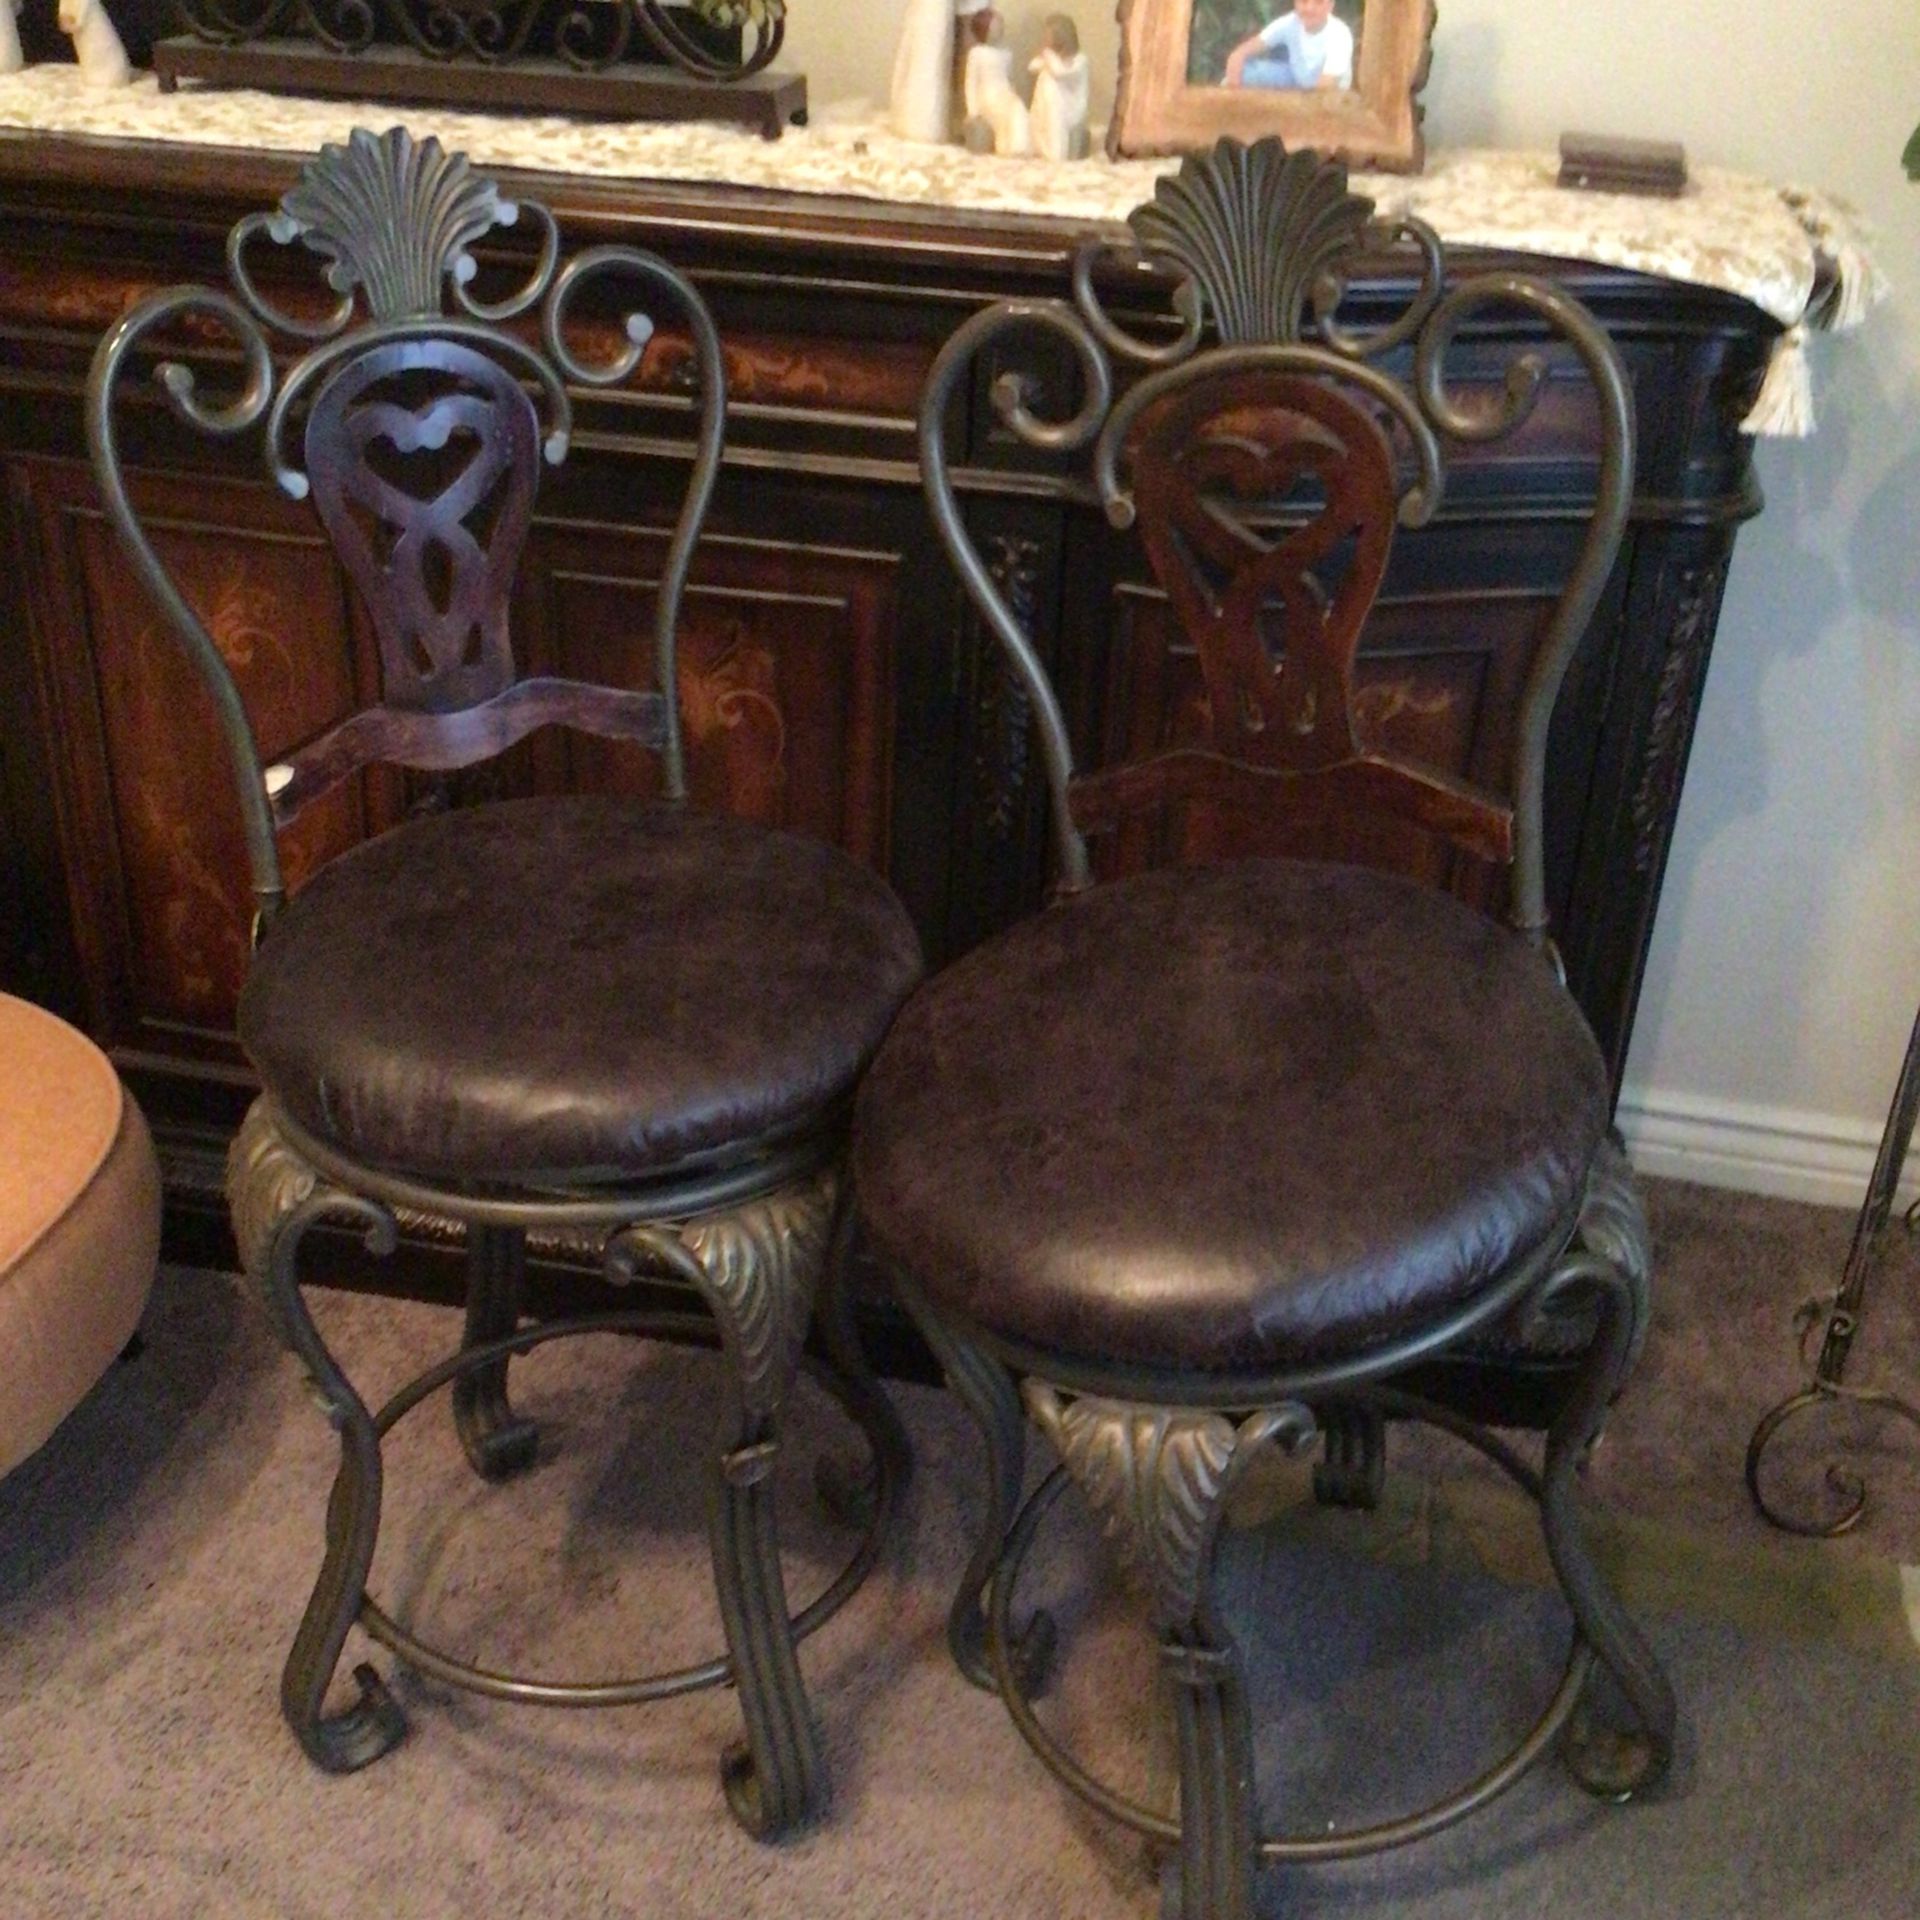 2 Counter High Stools 